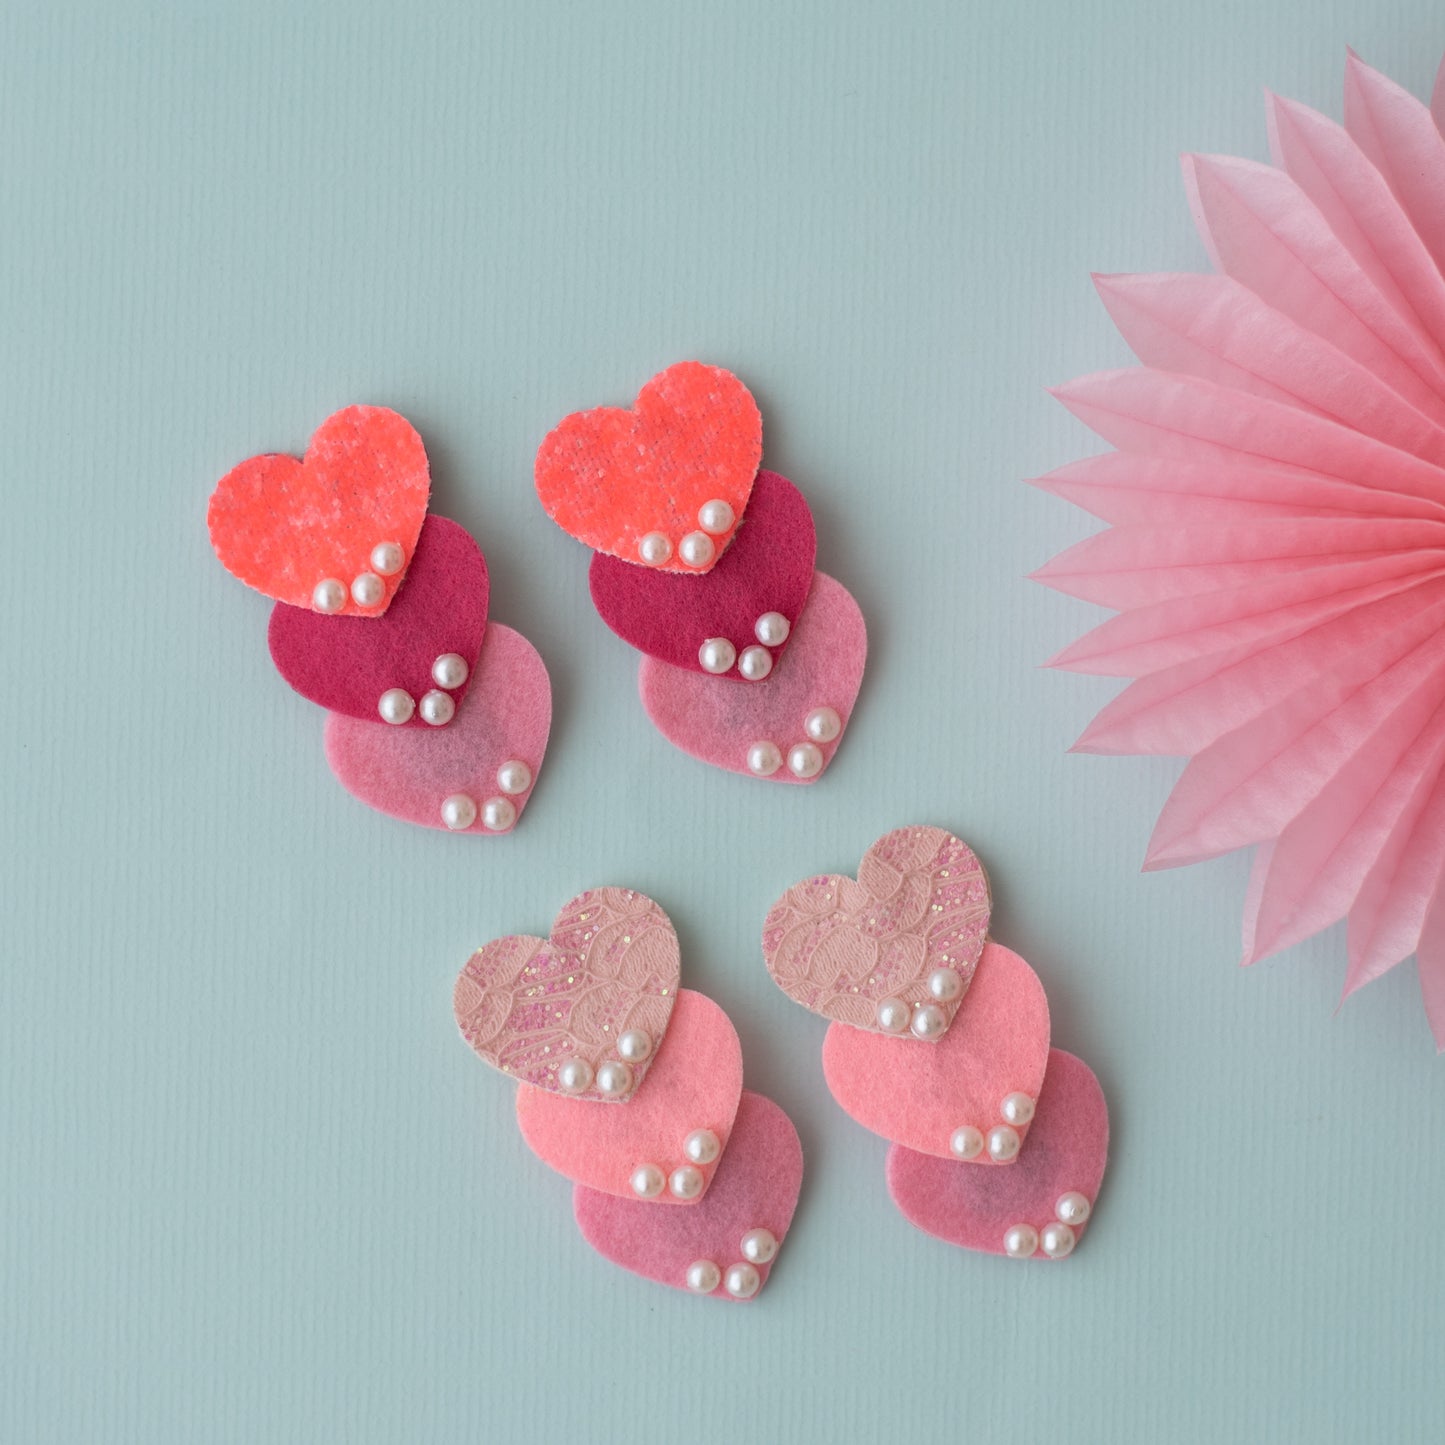 Cute shimmer heart tic-tac pins embellished with pearls  - Orange, Pink, Offwhite